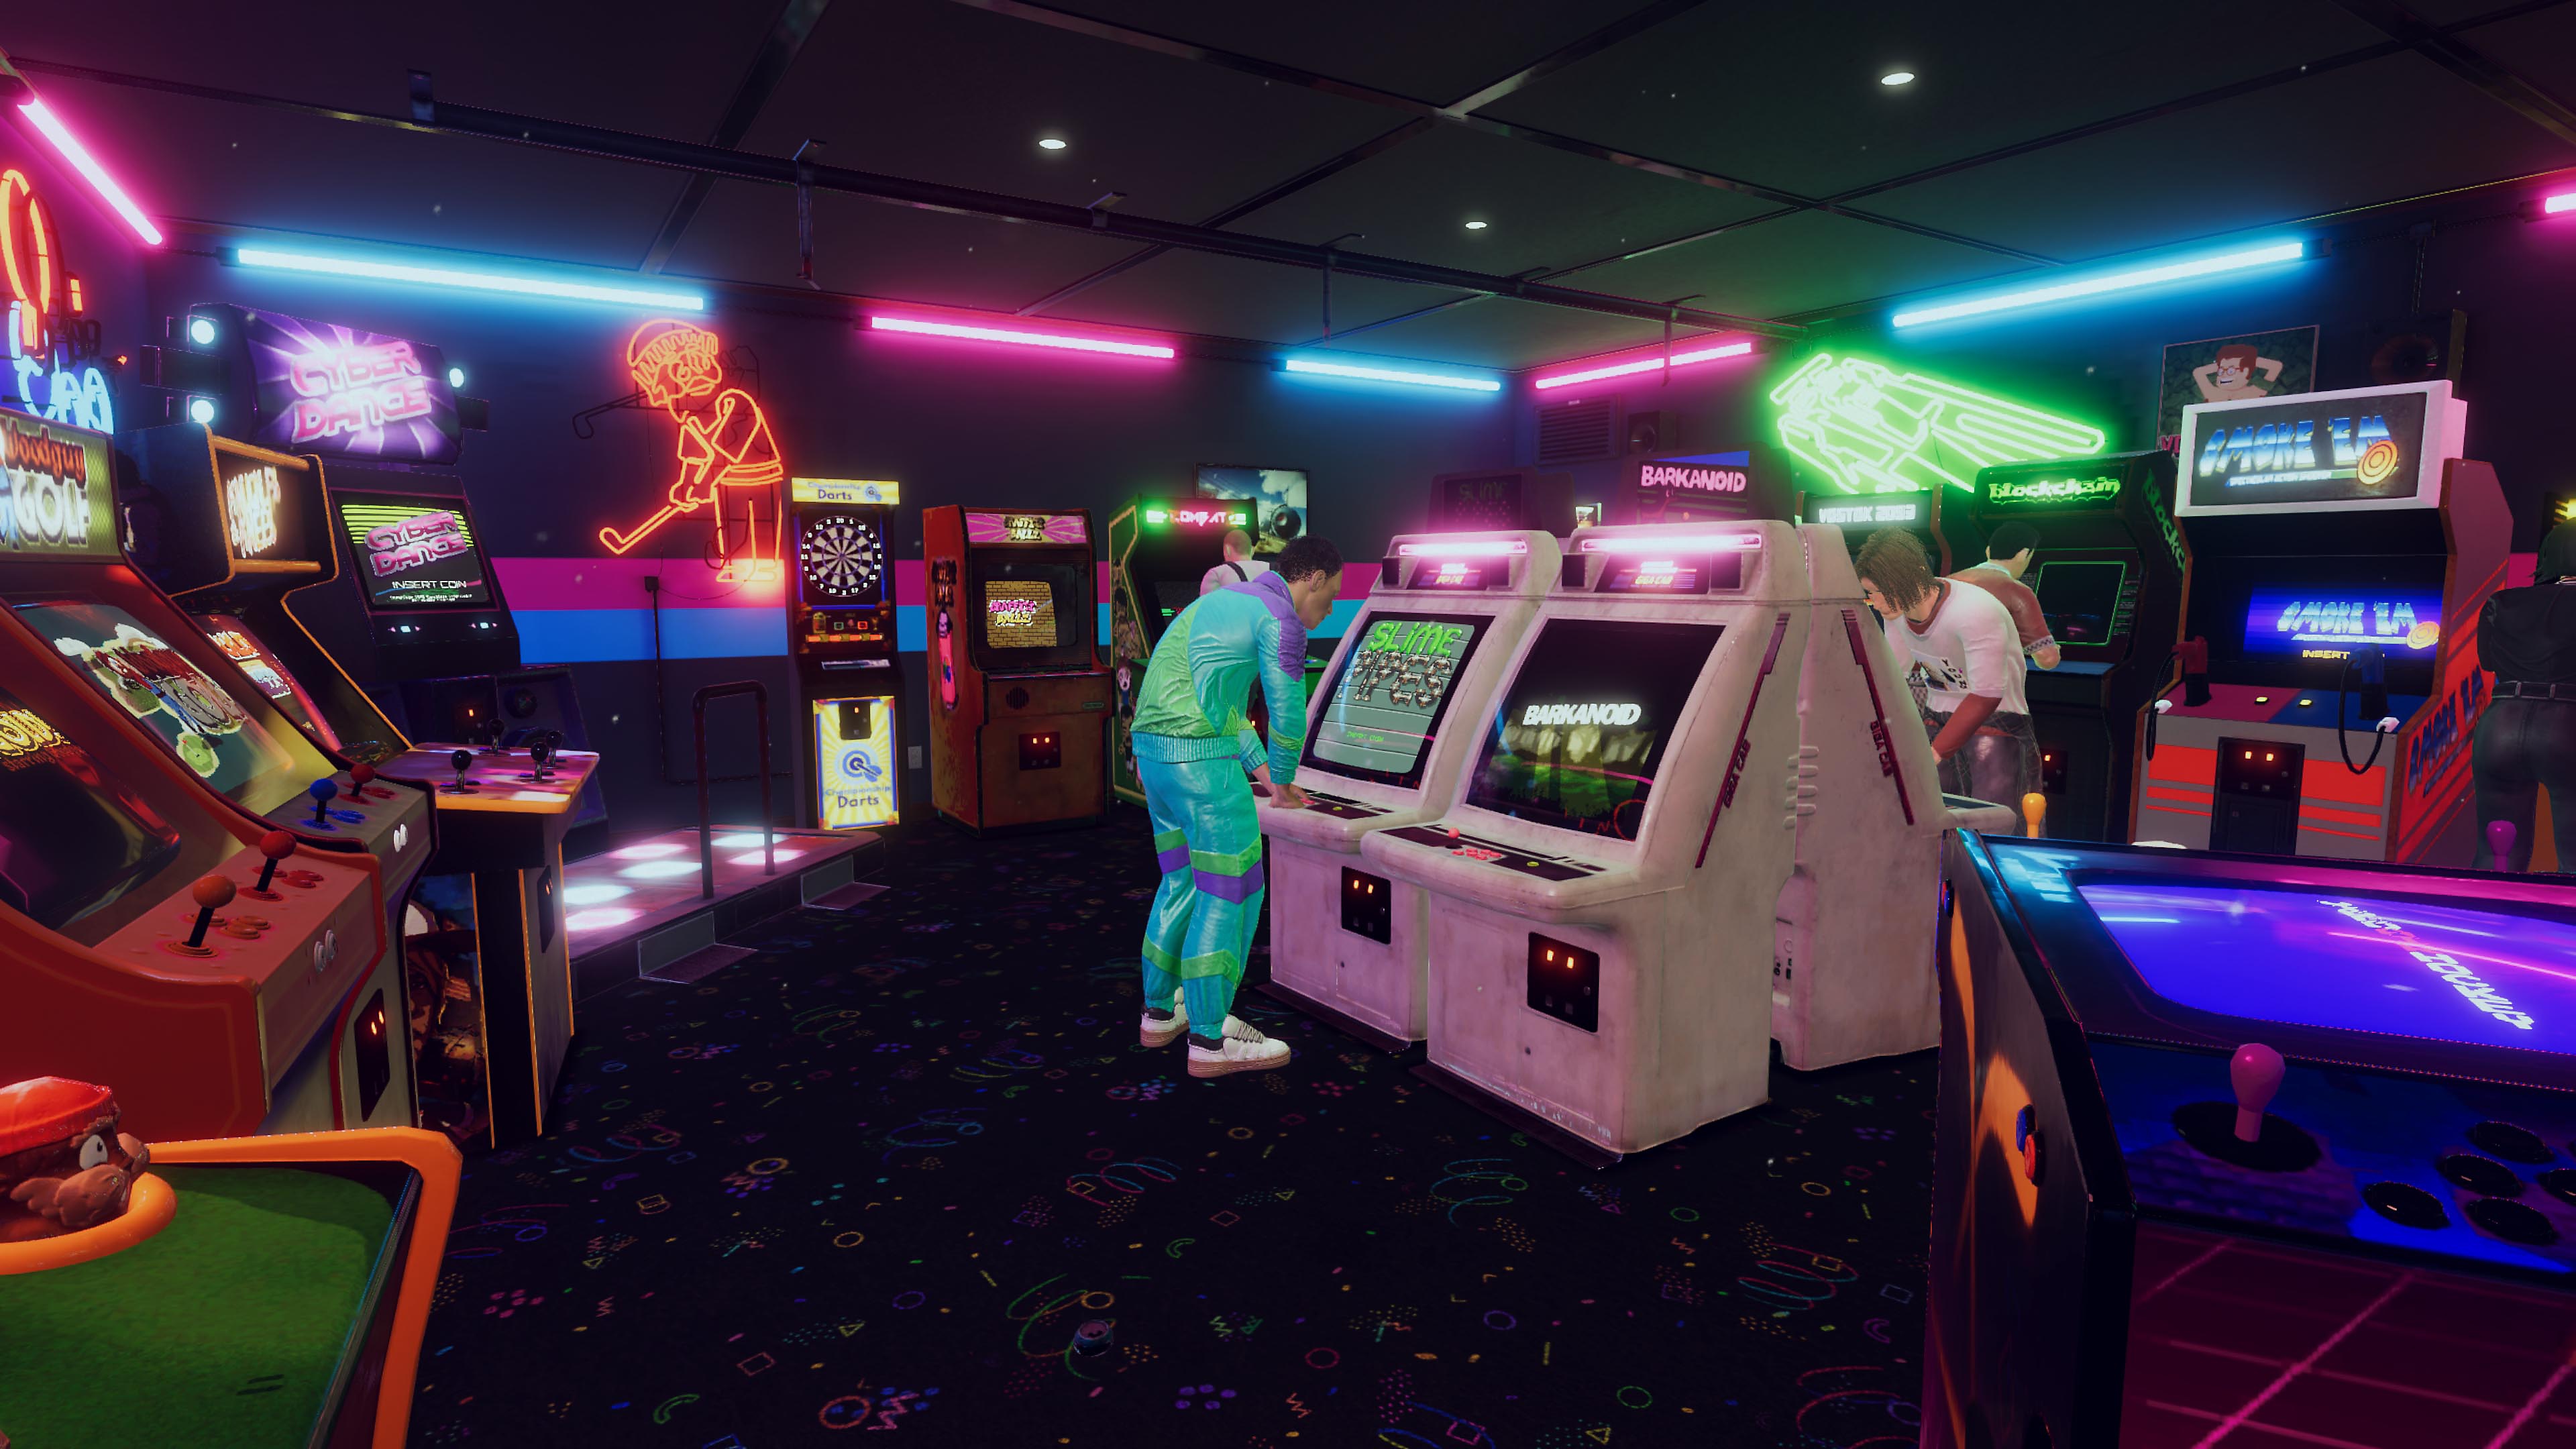 Arcade Paradise screenshot showing a 90's-style retro arcade with blue and pink neon lights